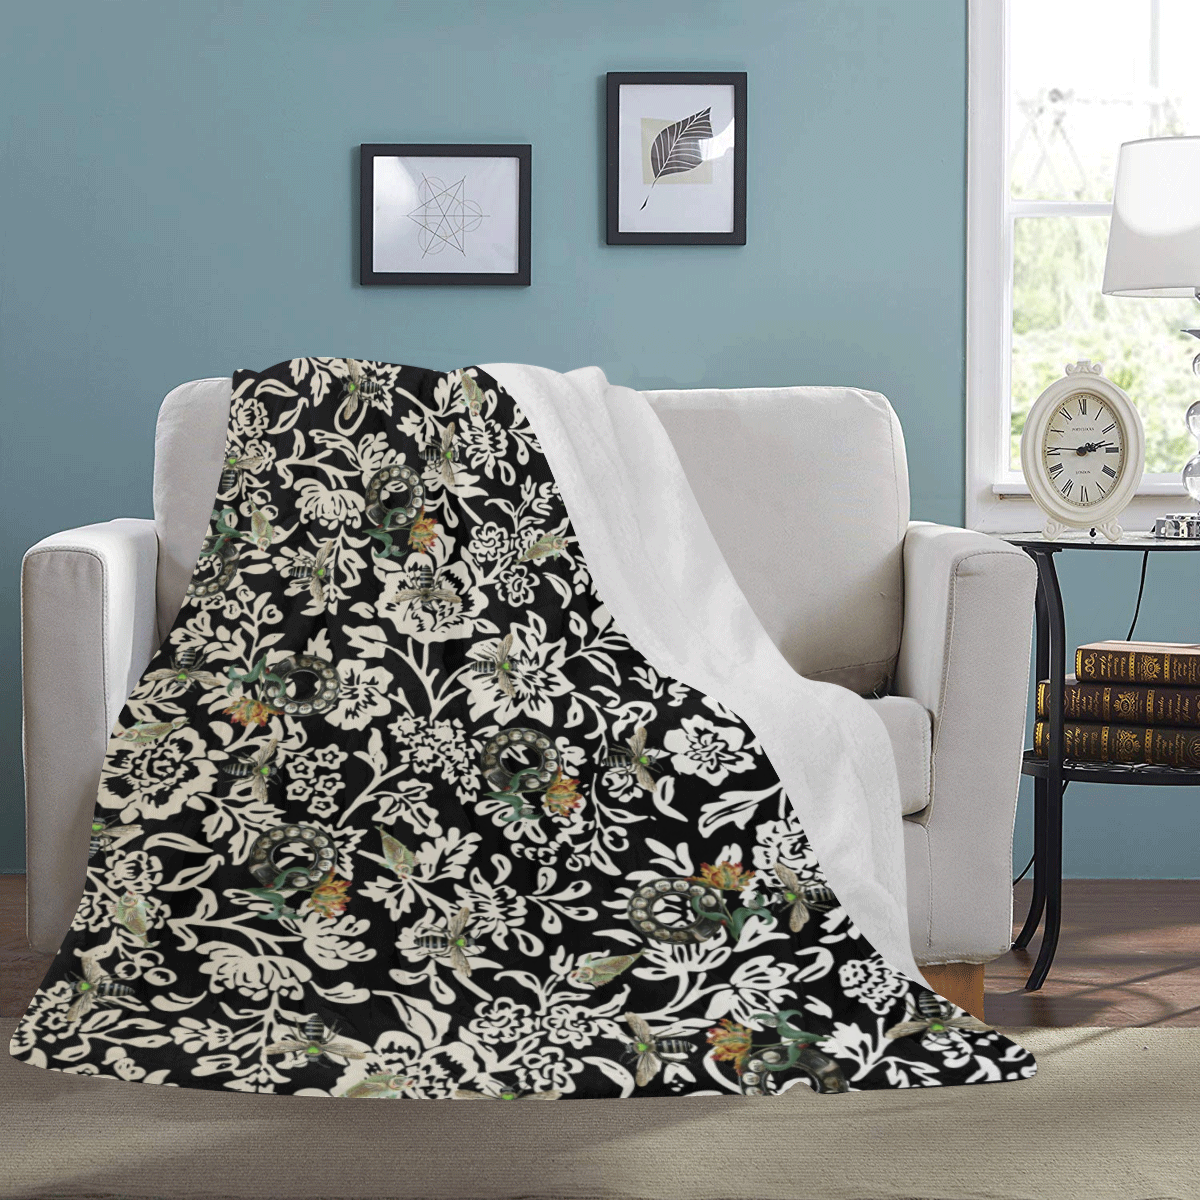 Just Bees and Dials and Fish and Tulips Ultra-Soft Micro Fleece Blanket 60"x80"